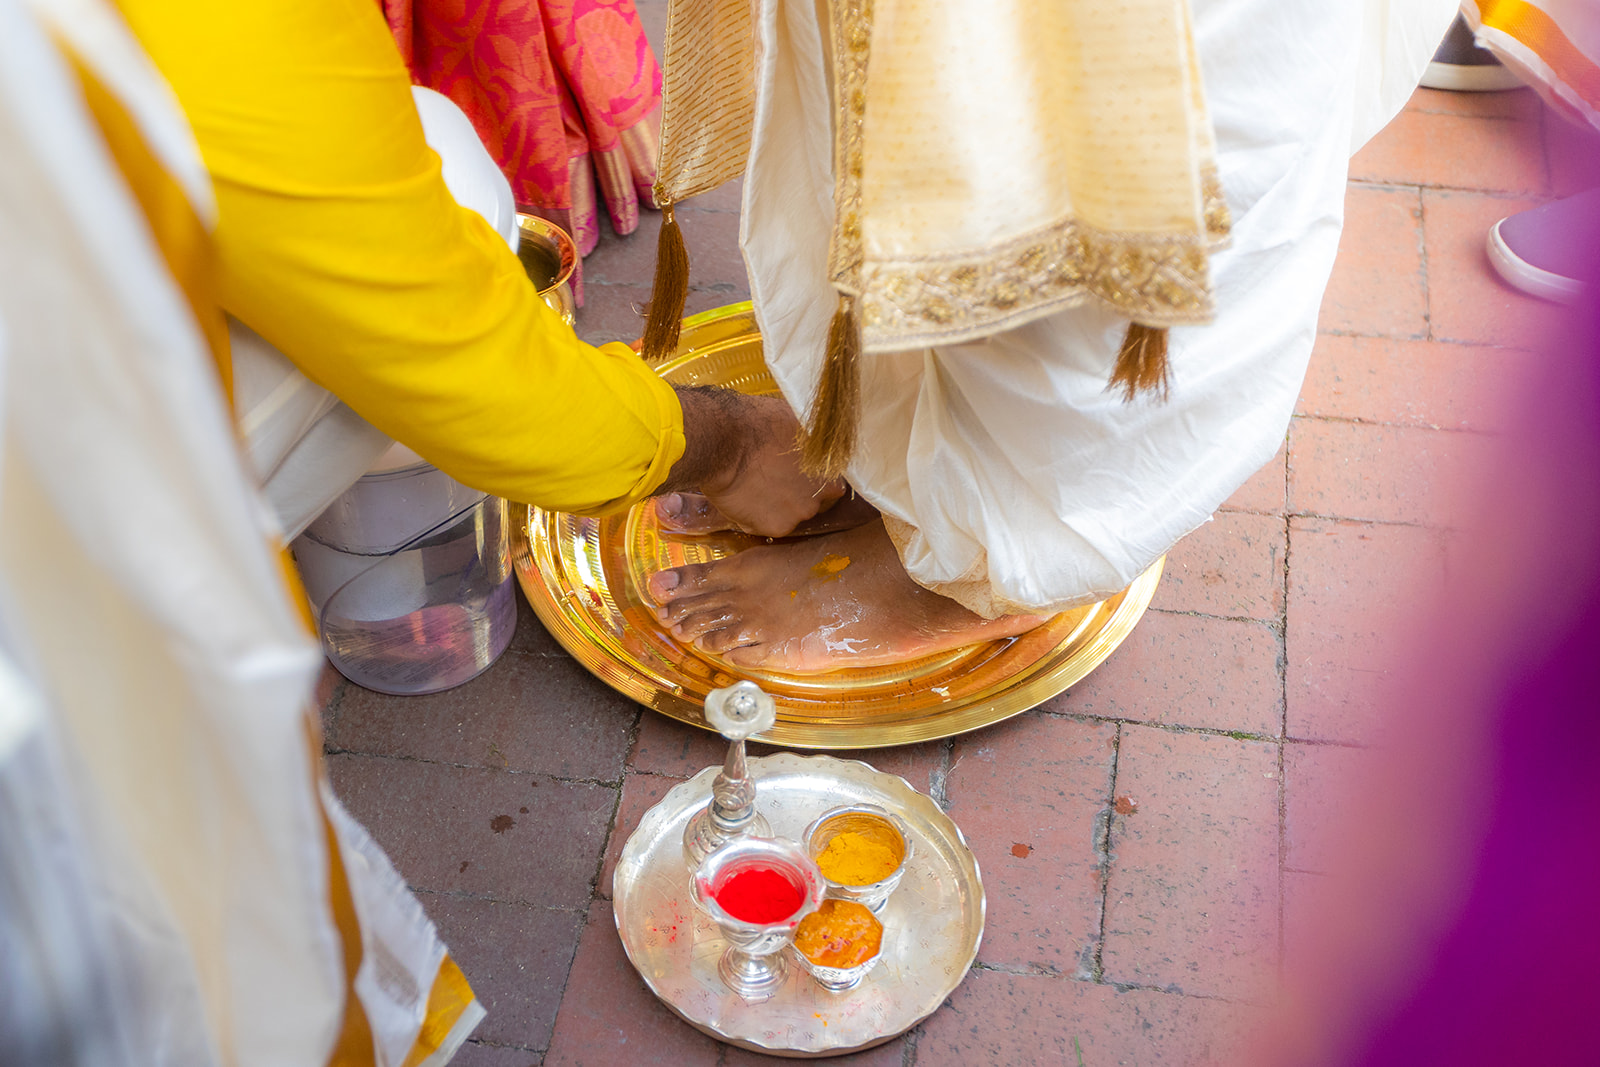 The groom's feet gets washed in the indian wedding tradition at Renstorff House, a Bay Area Indian Wedding Venue.